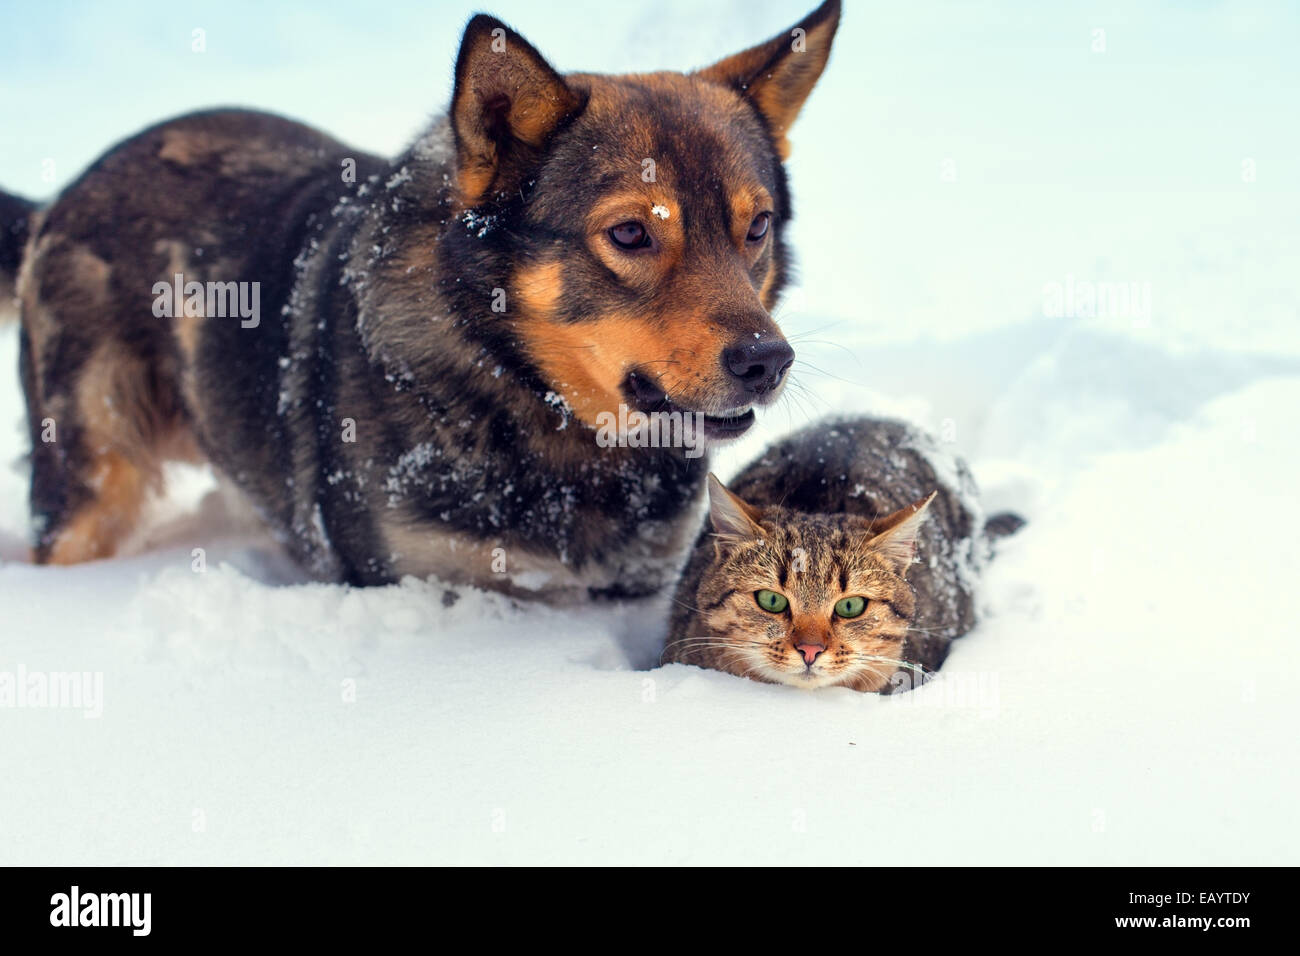 Best friends cat and dog playing outdoor in snow in winter Stock Photo